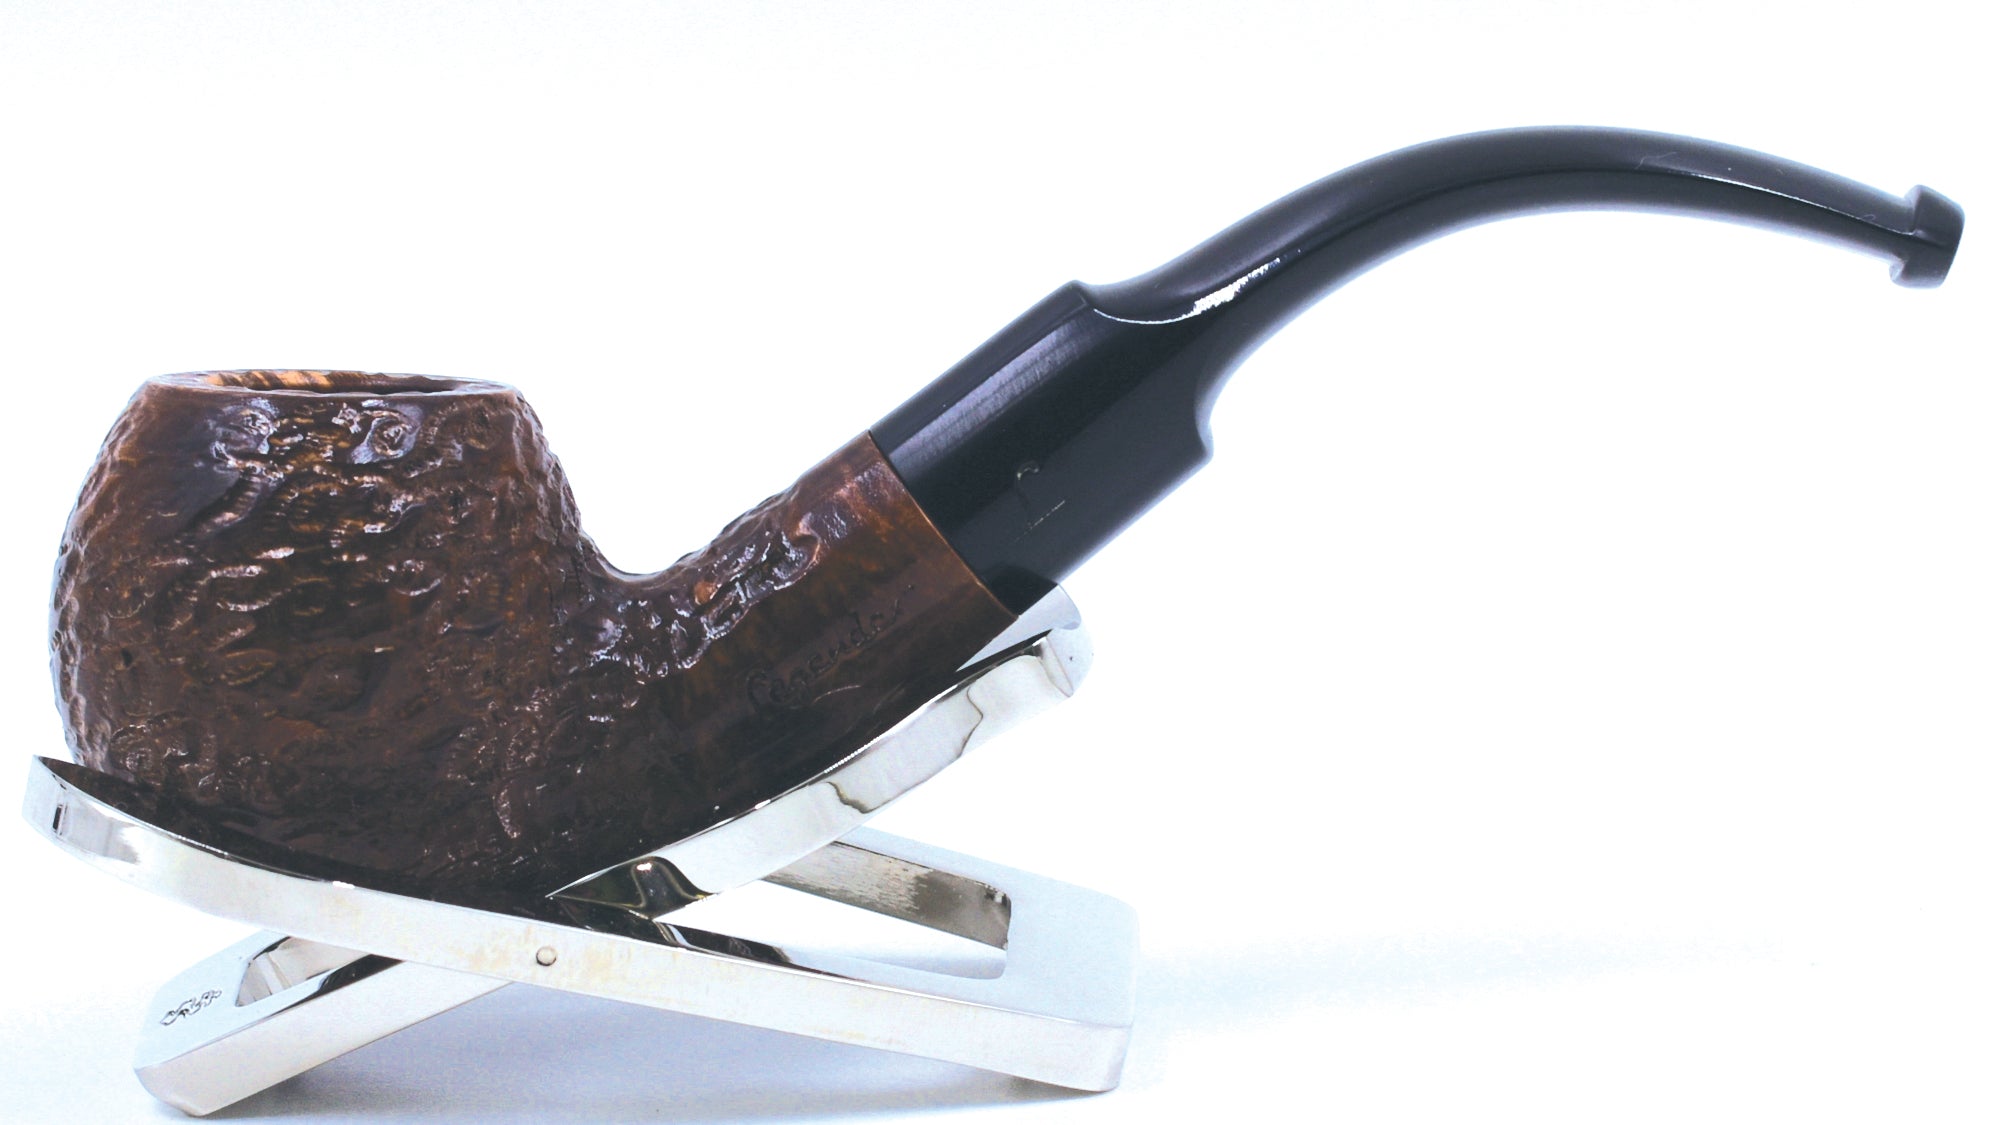 LEGENDEX® SCALADI* 6 MM Filtered Briar Smoking Pipe Made In Italy 01-08-112